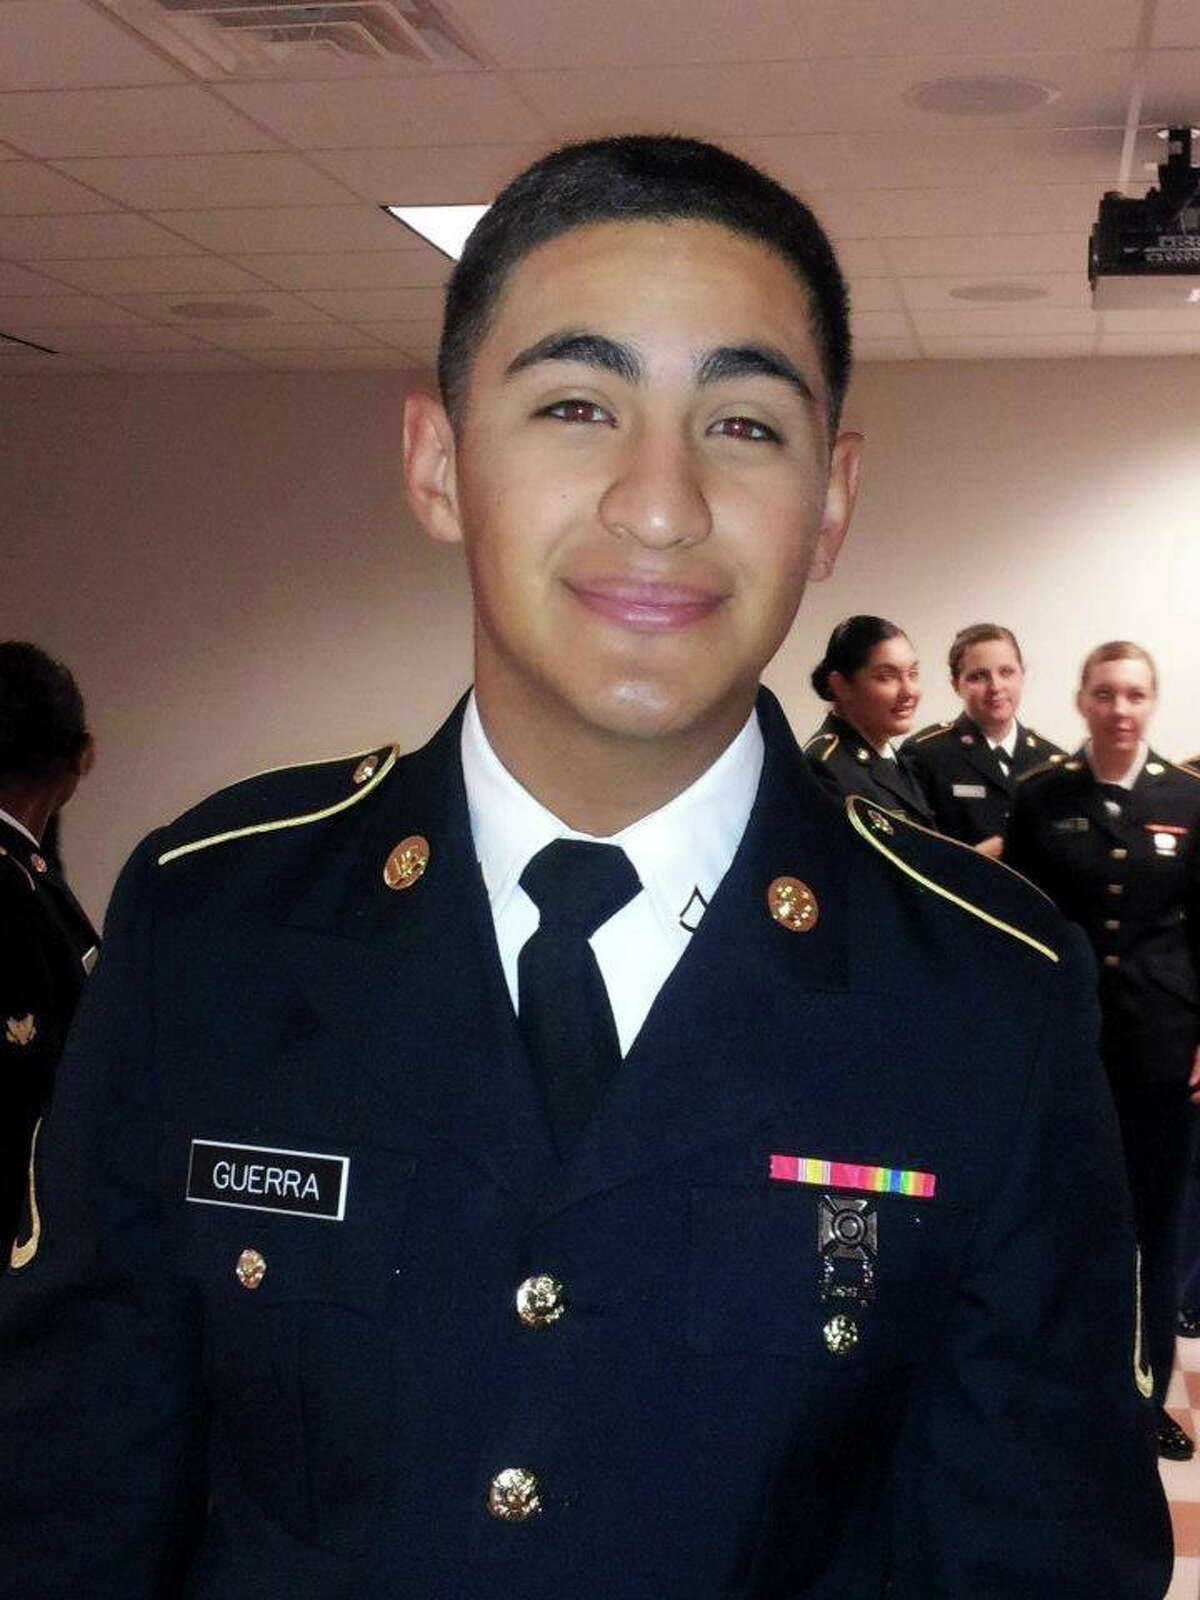 Jose Alberto Guerra, 19, was fatally shot by a Bexar County sergeant early Sunday.